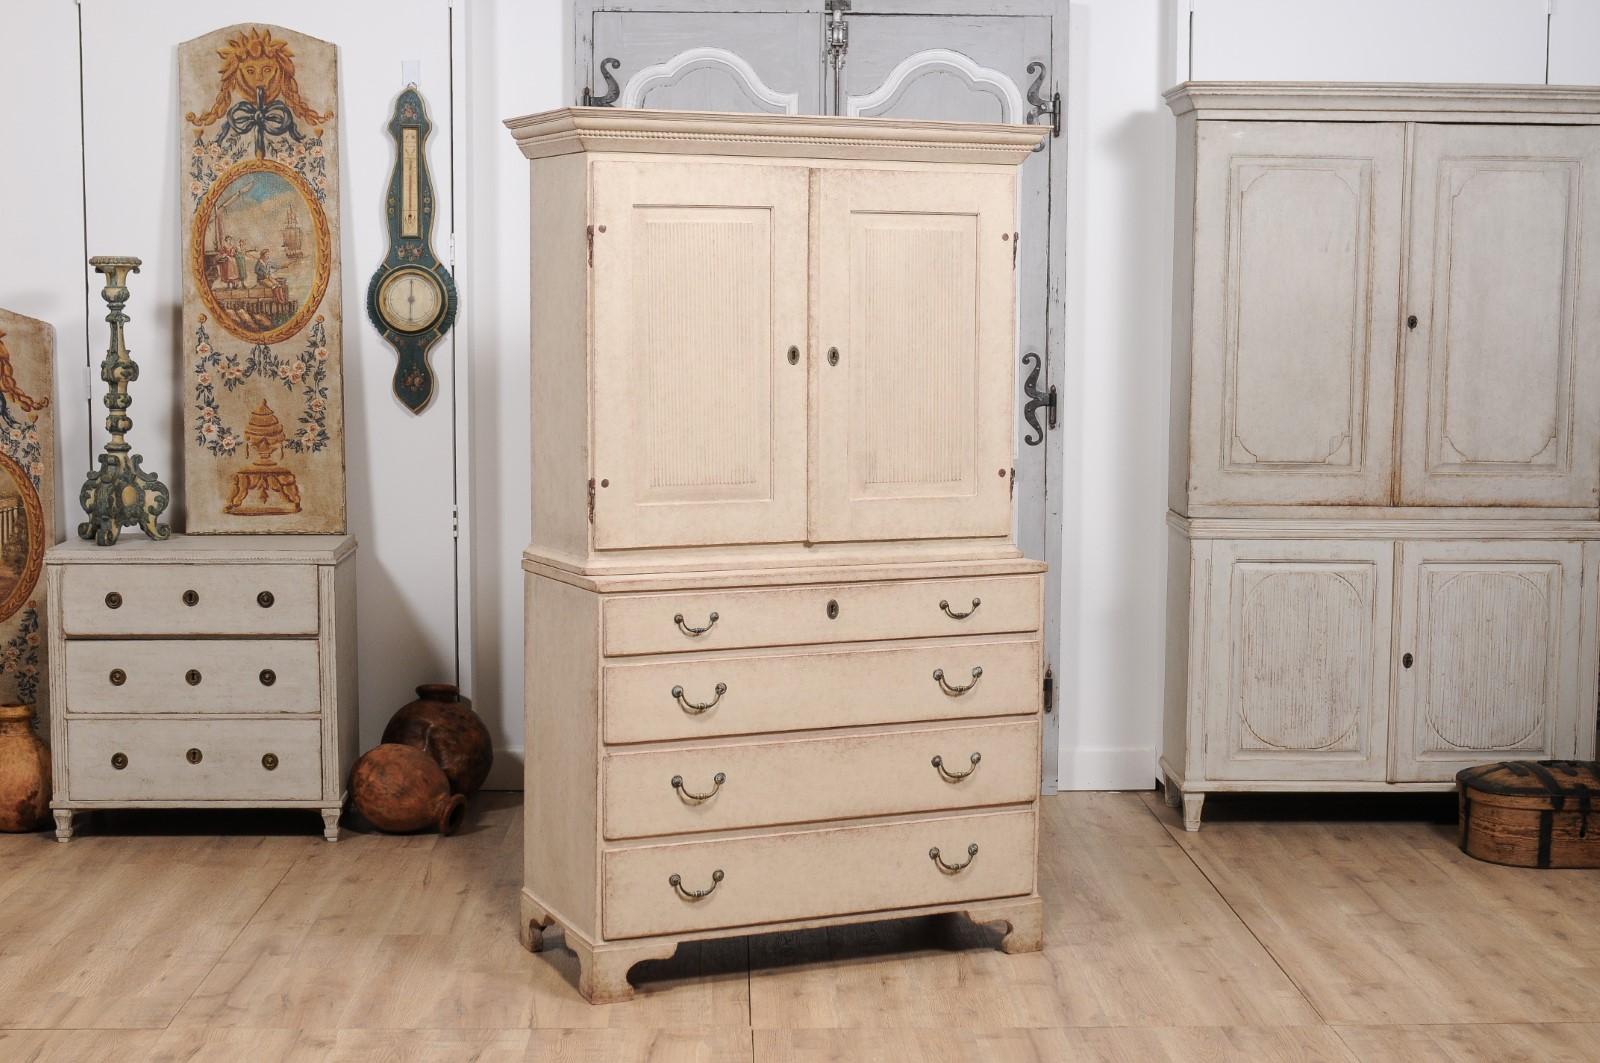 1834 Swedish Two-part Painted Cabinet with Doors and Graduated Drawers For Sale 7